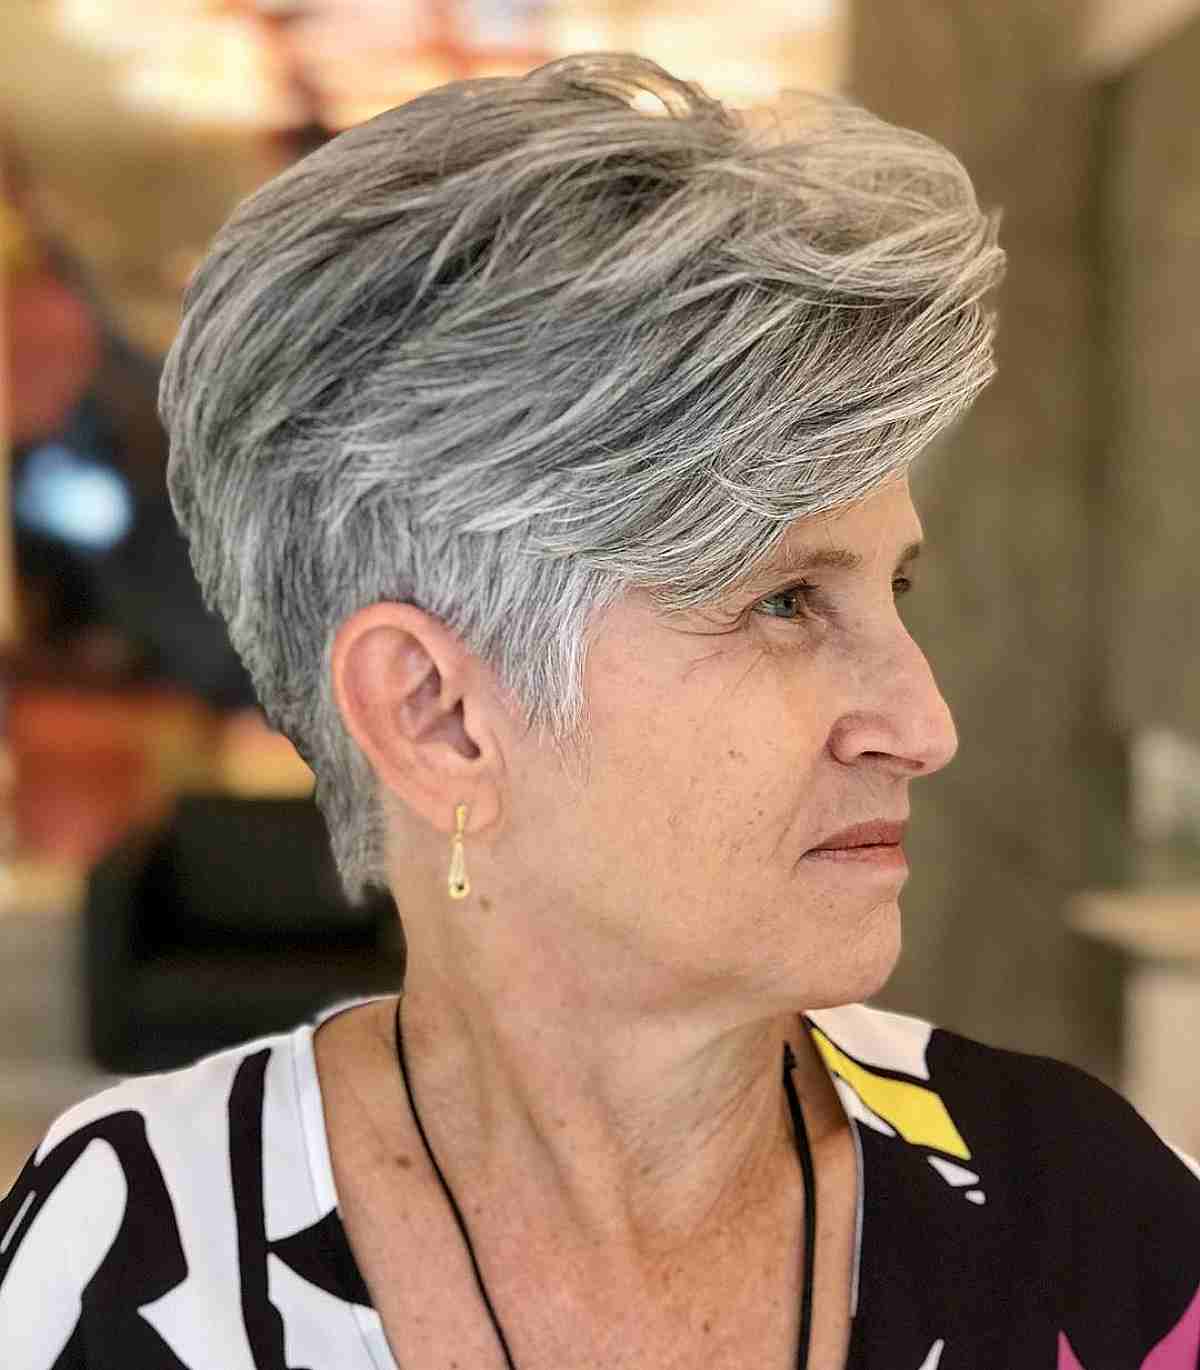 Amazing Long Pixie Cut for Women Over 70